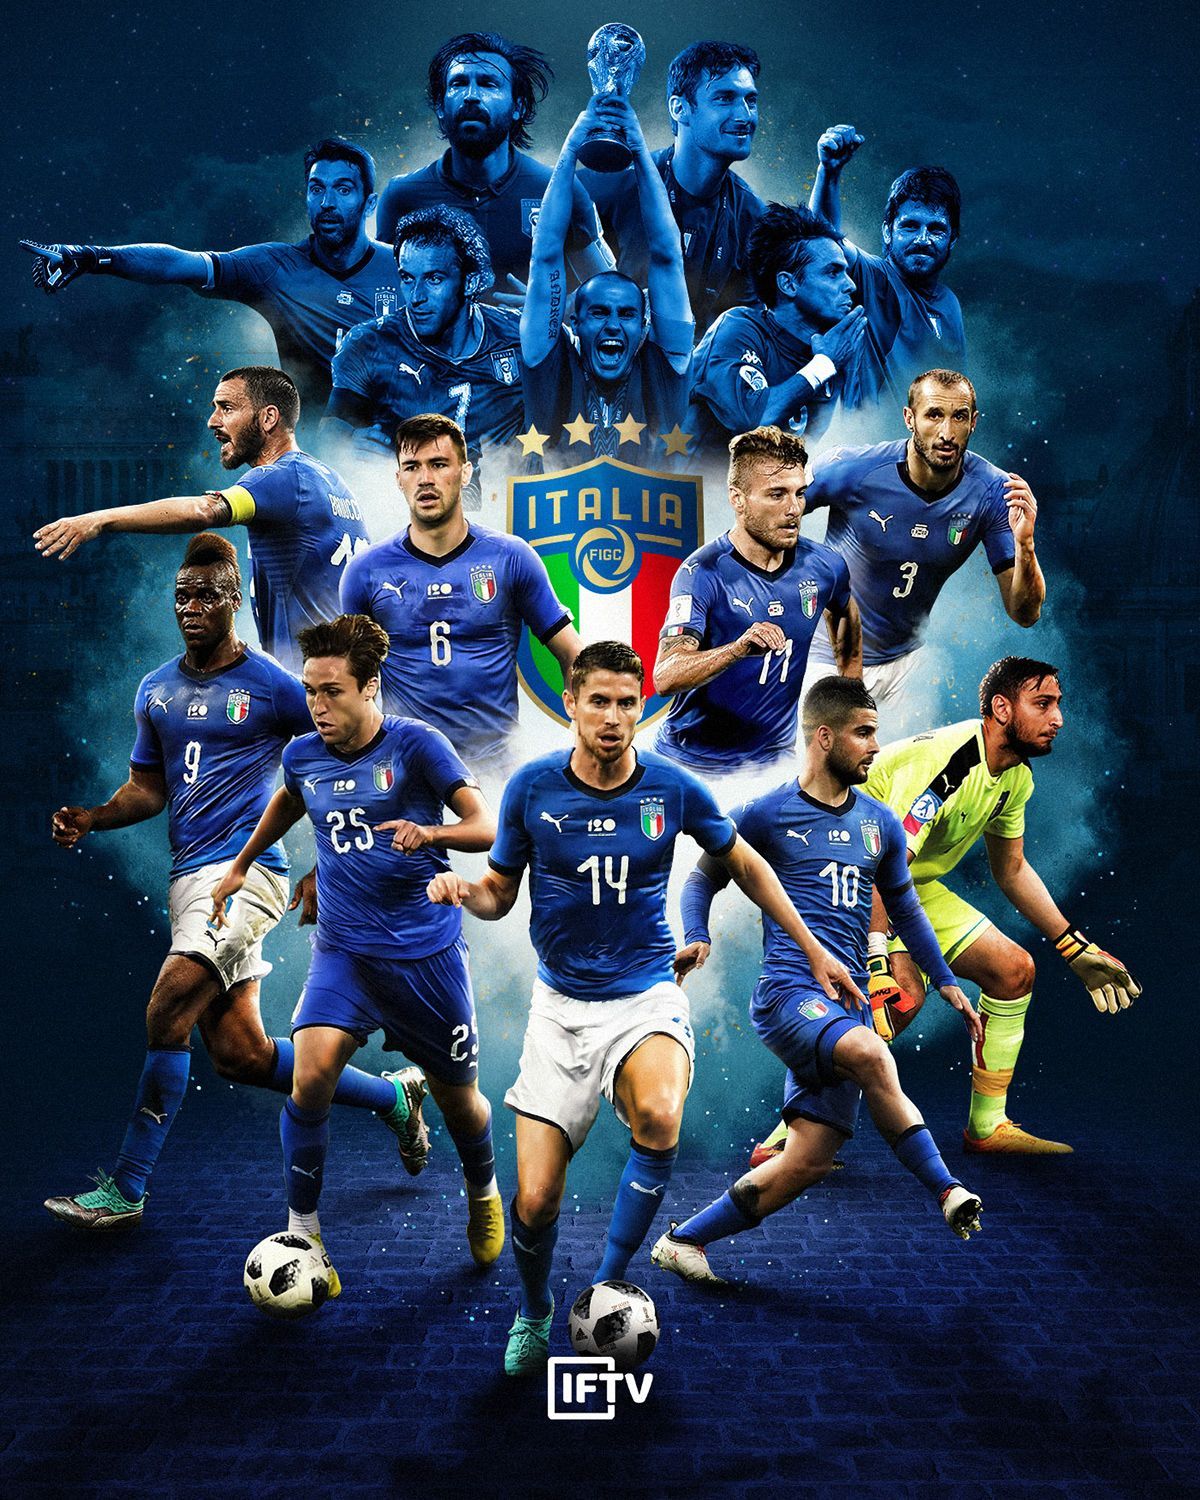 Azzurri & Serie A 2018 2019 Posters For IFTV. Italy Soccer, Football Poster, Italy National Football Team